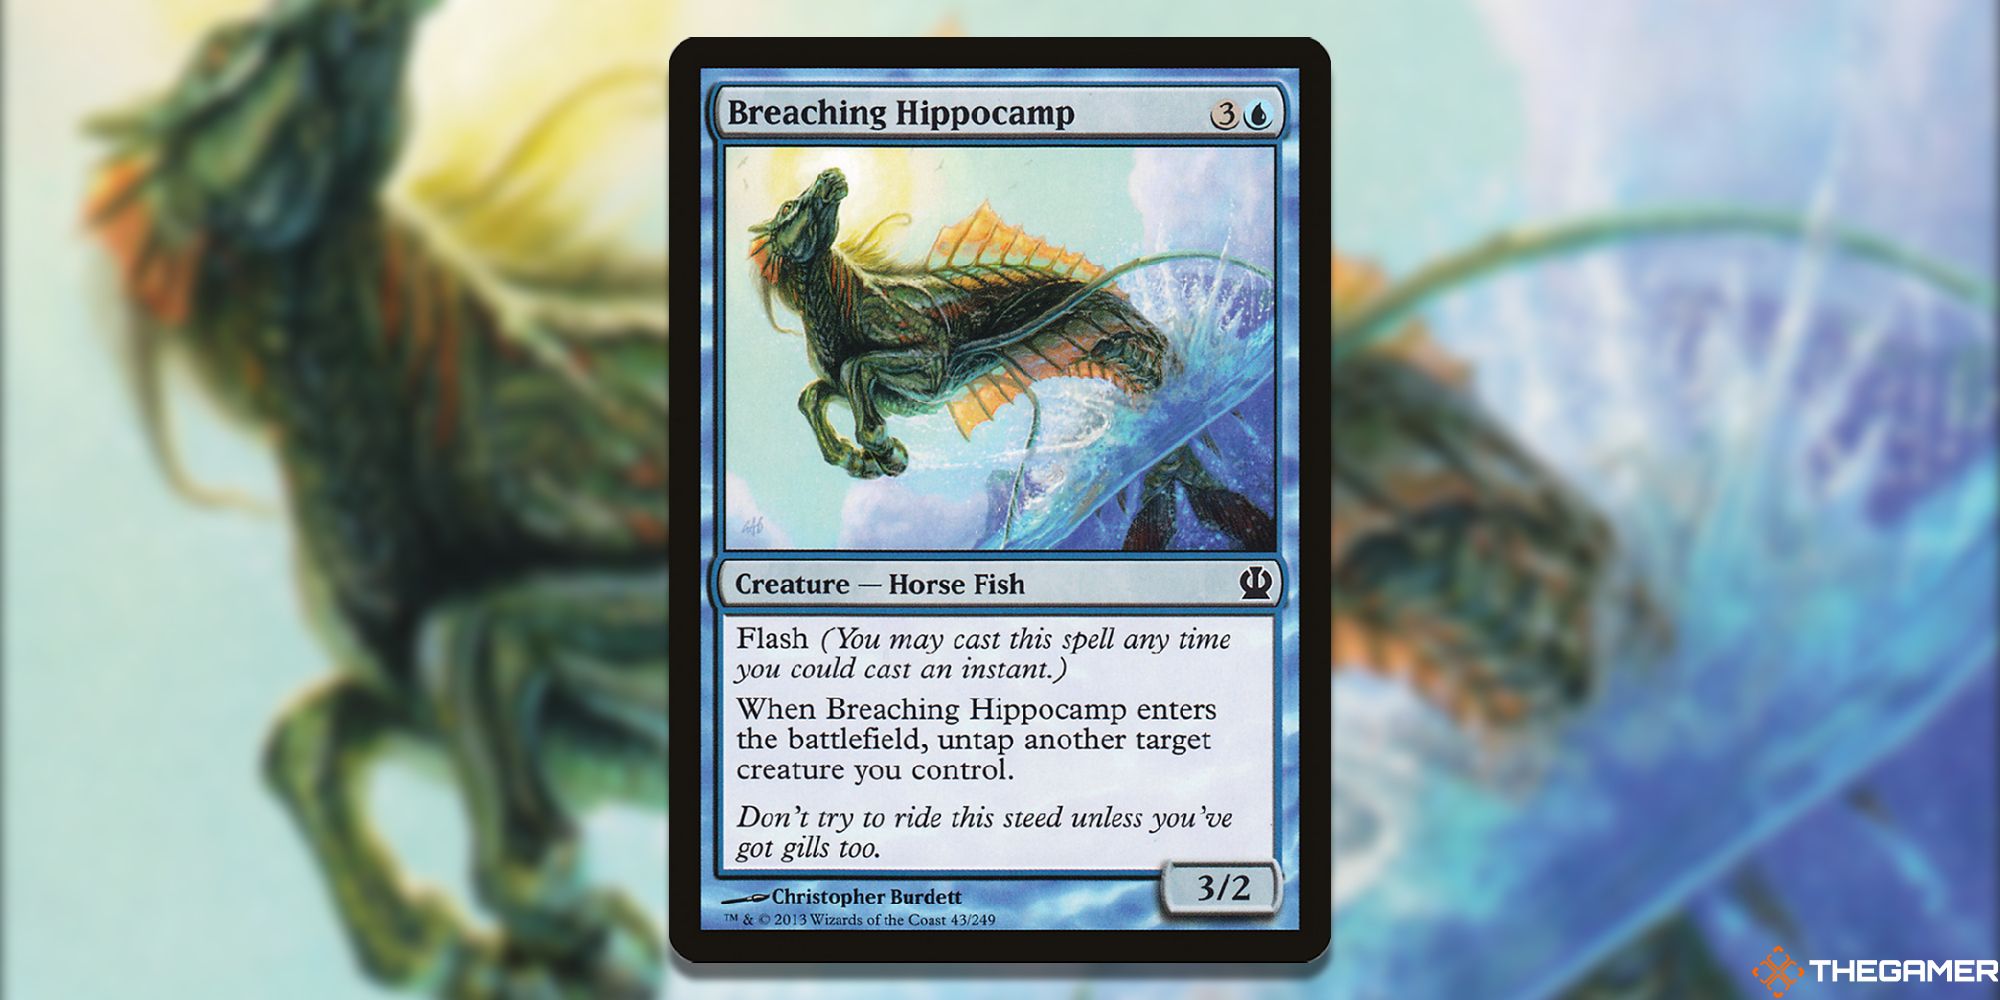 Image of the Breaching Hippocamp card in Magic: The Gathering, with artwork by Christopher Burdett